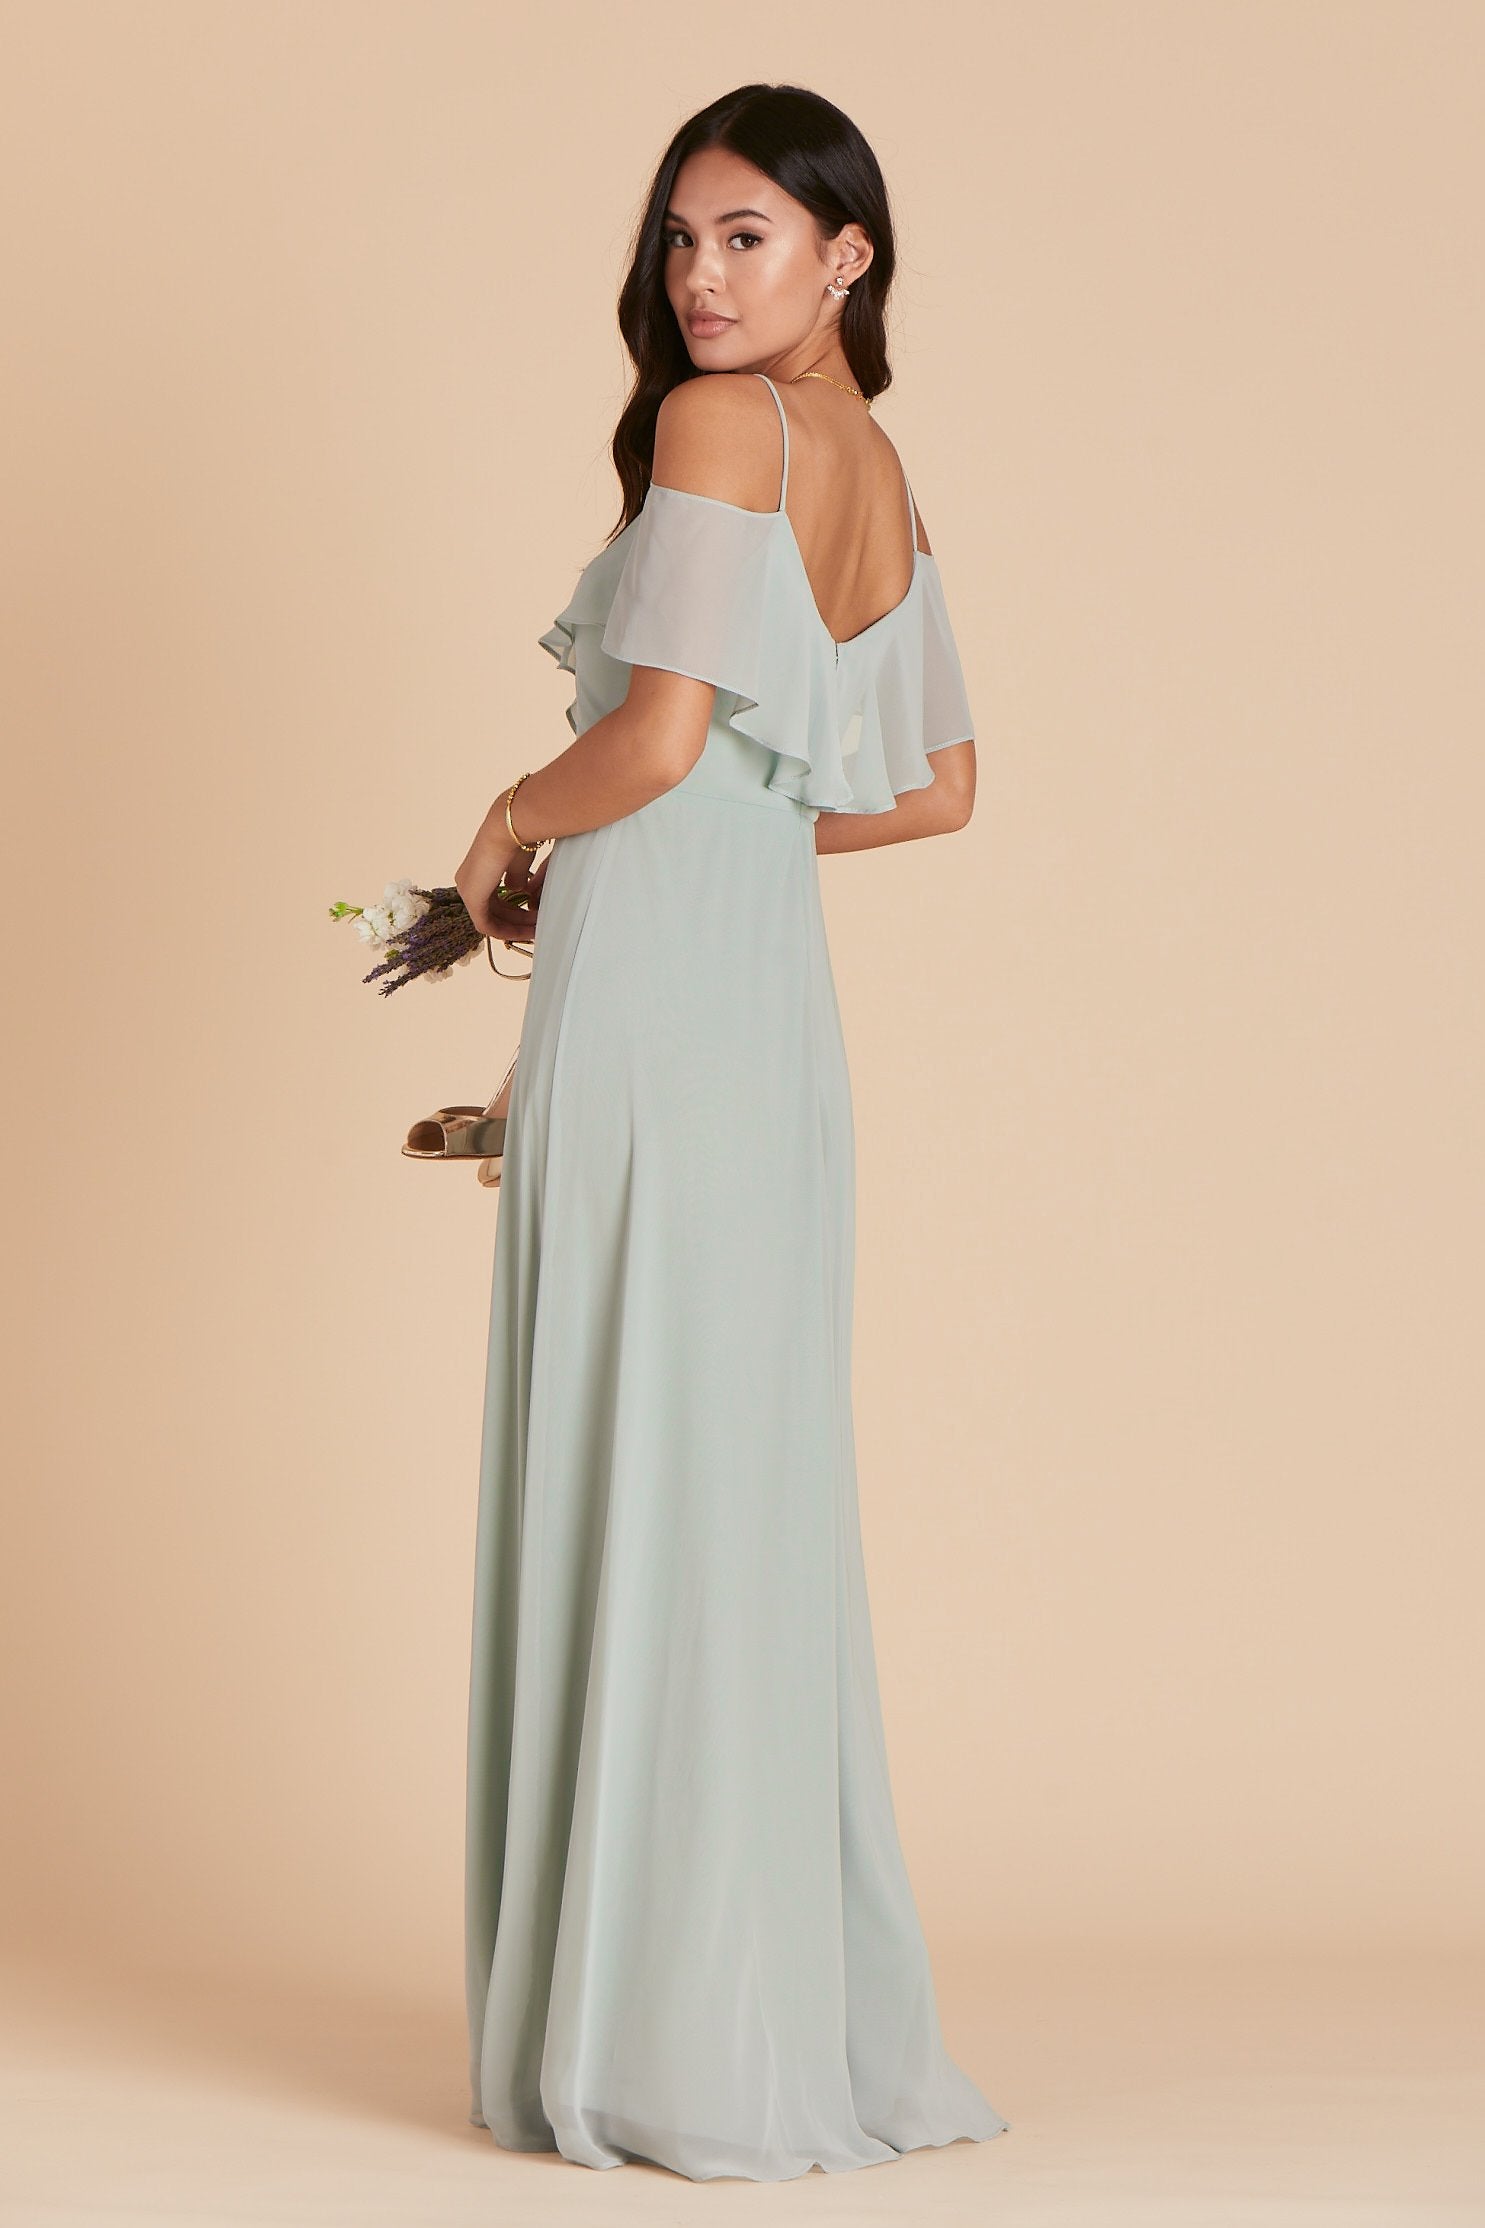 Jane convertible bridesmaid dress in sage green chiffon by Birdy Grey, side view